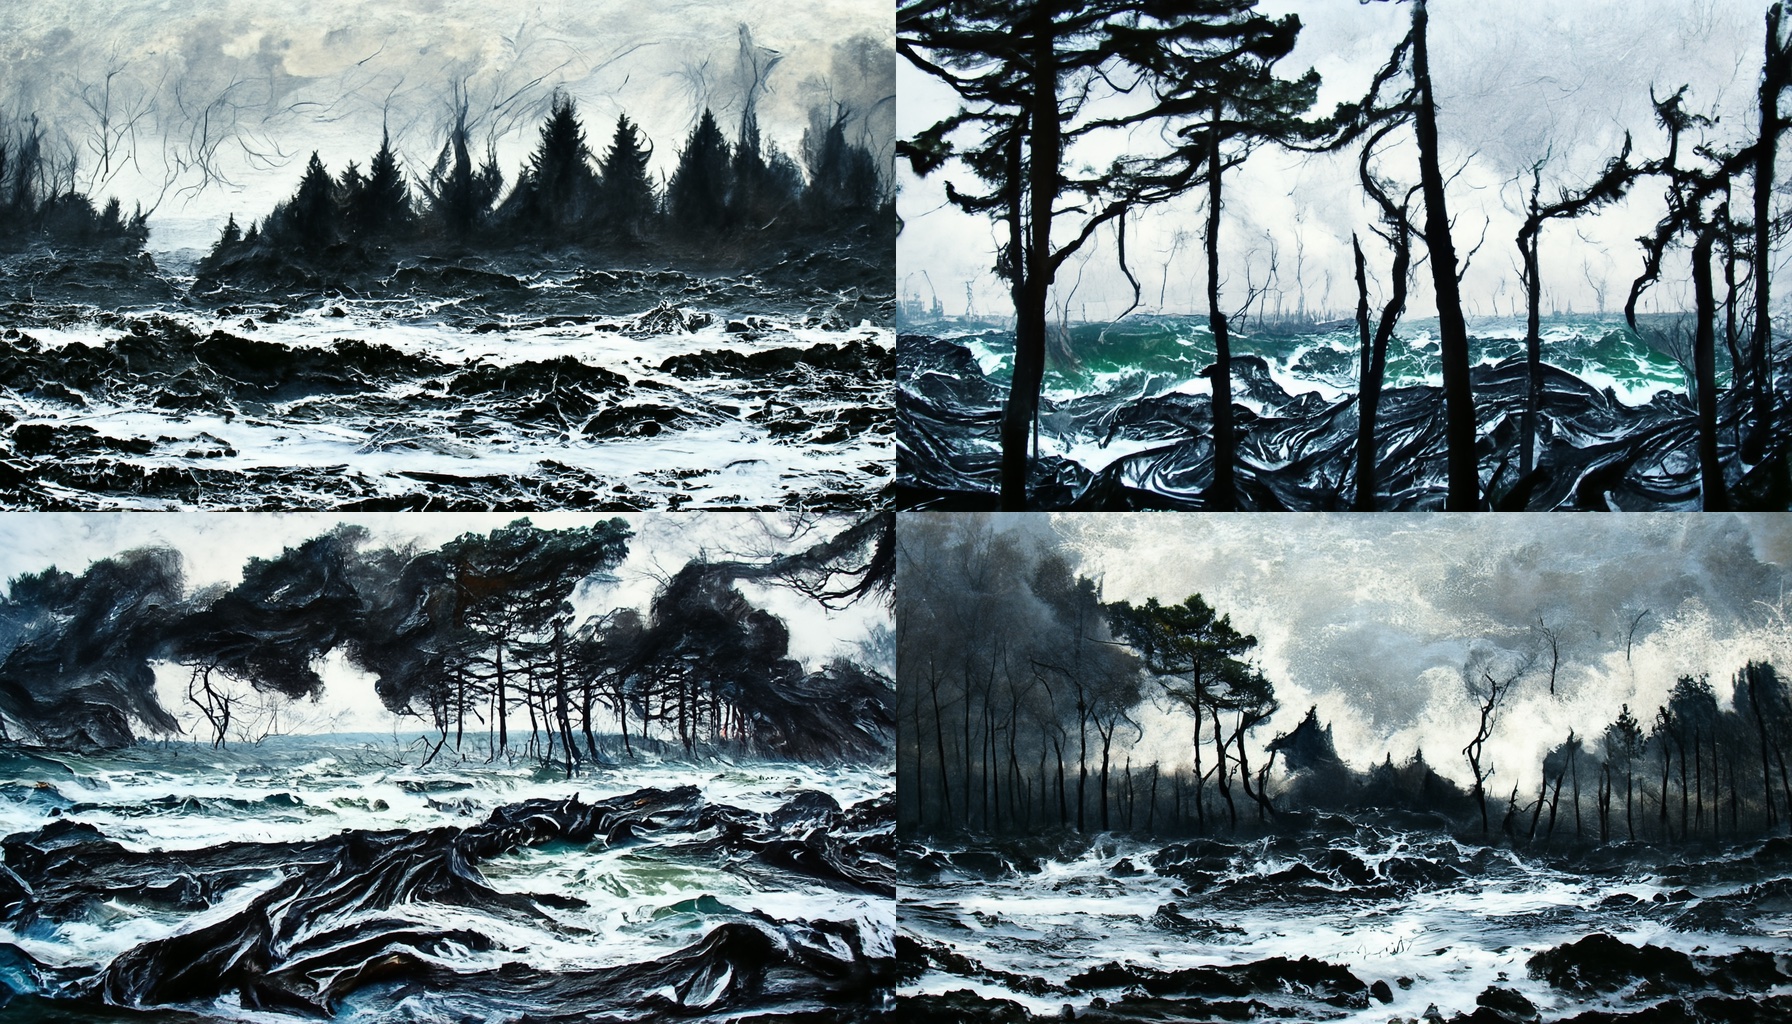 Shape of a dark forest raging sea in the foreground 13568ce2 4545 4859 995d 5bf819256702